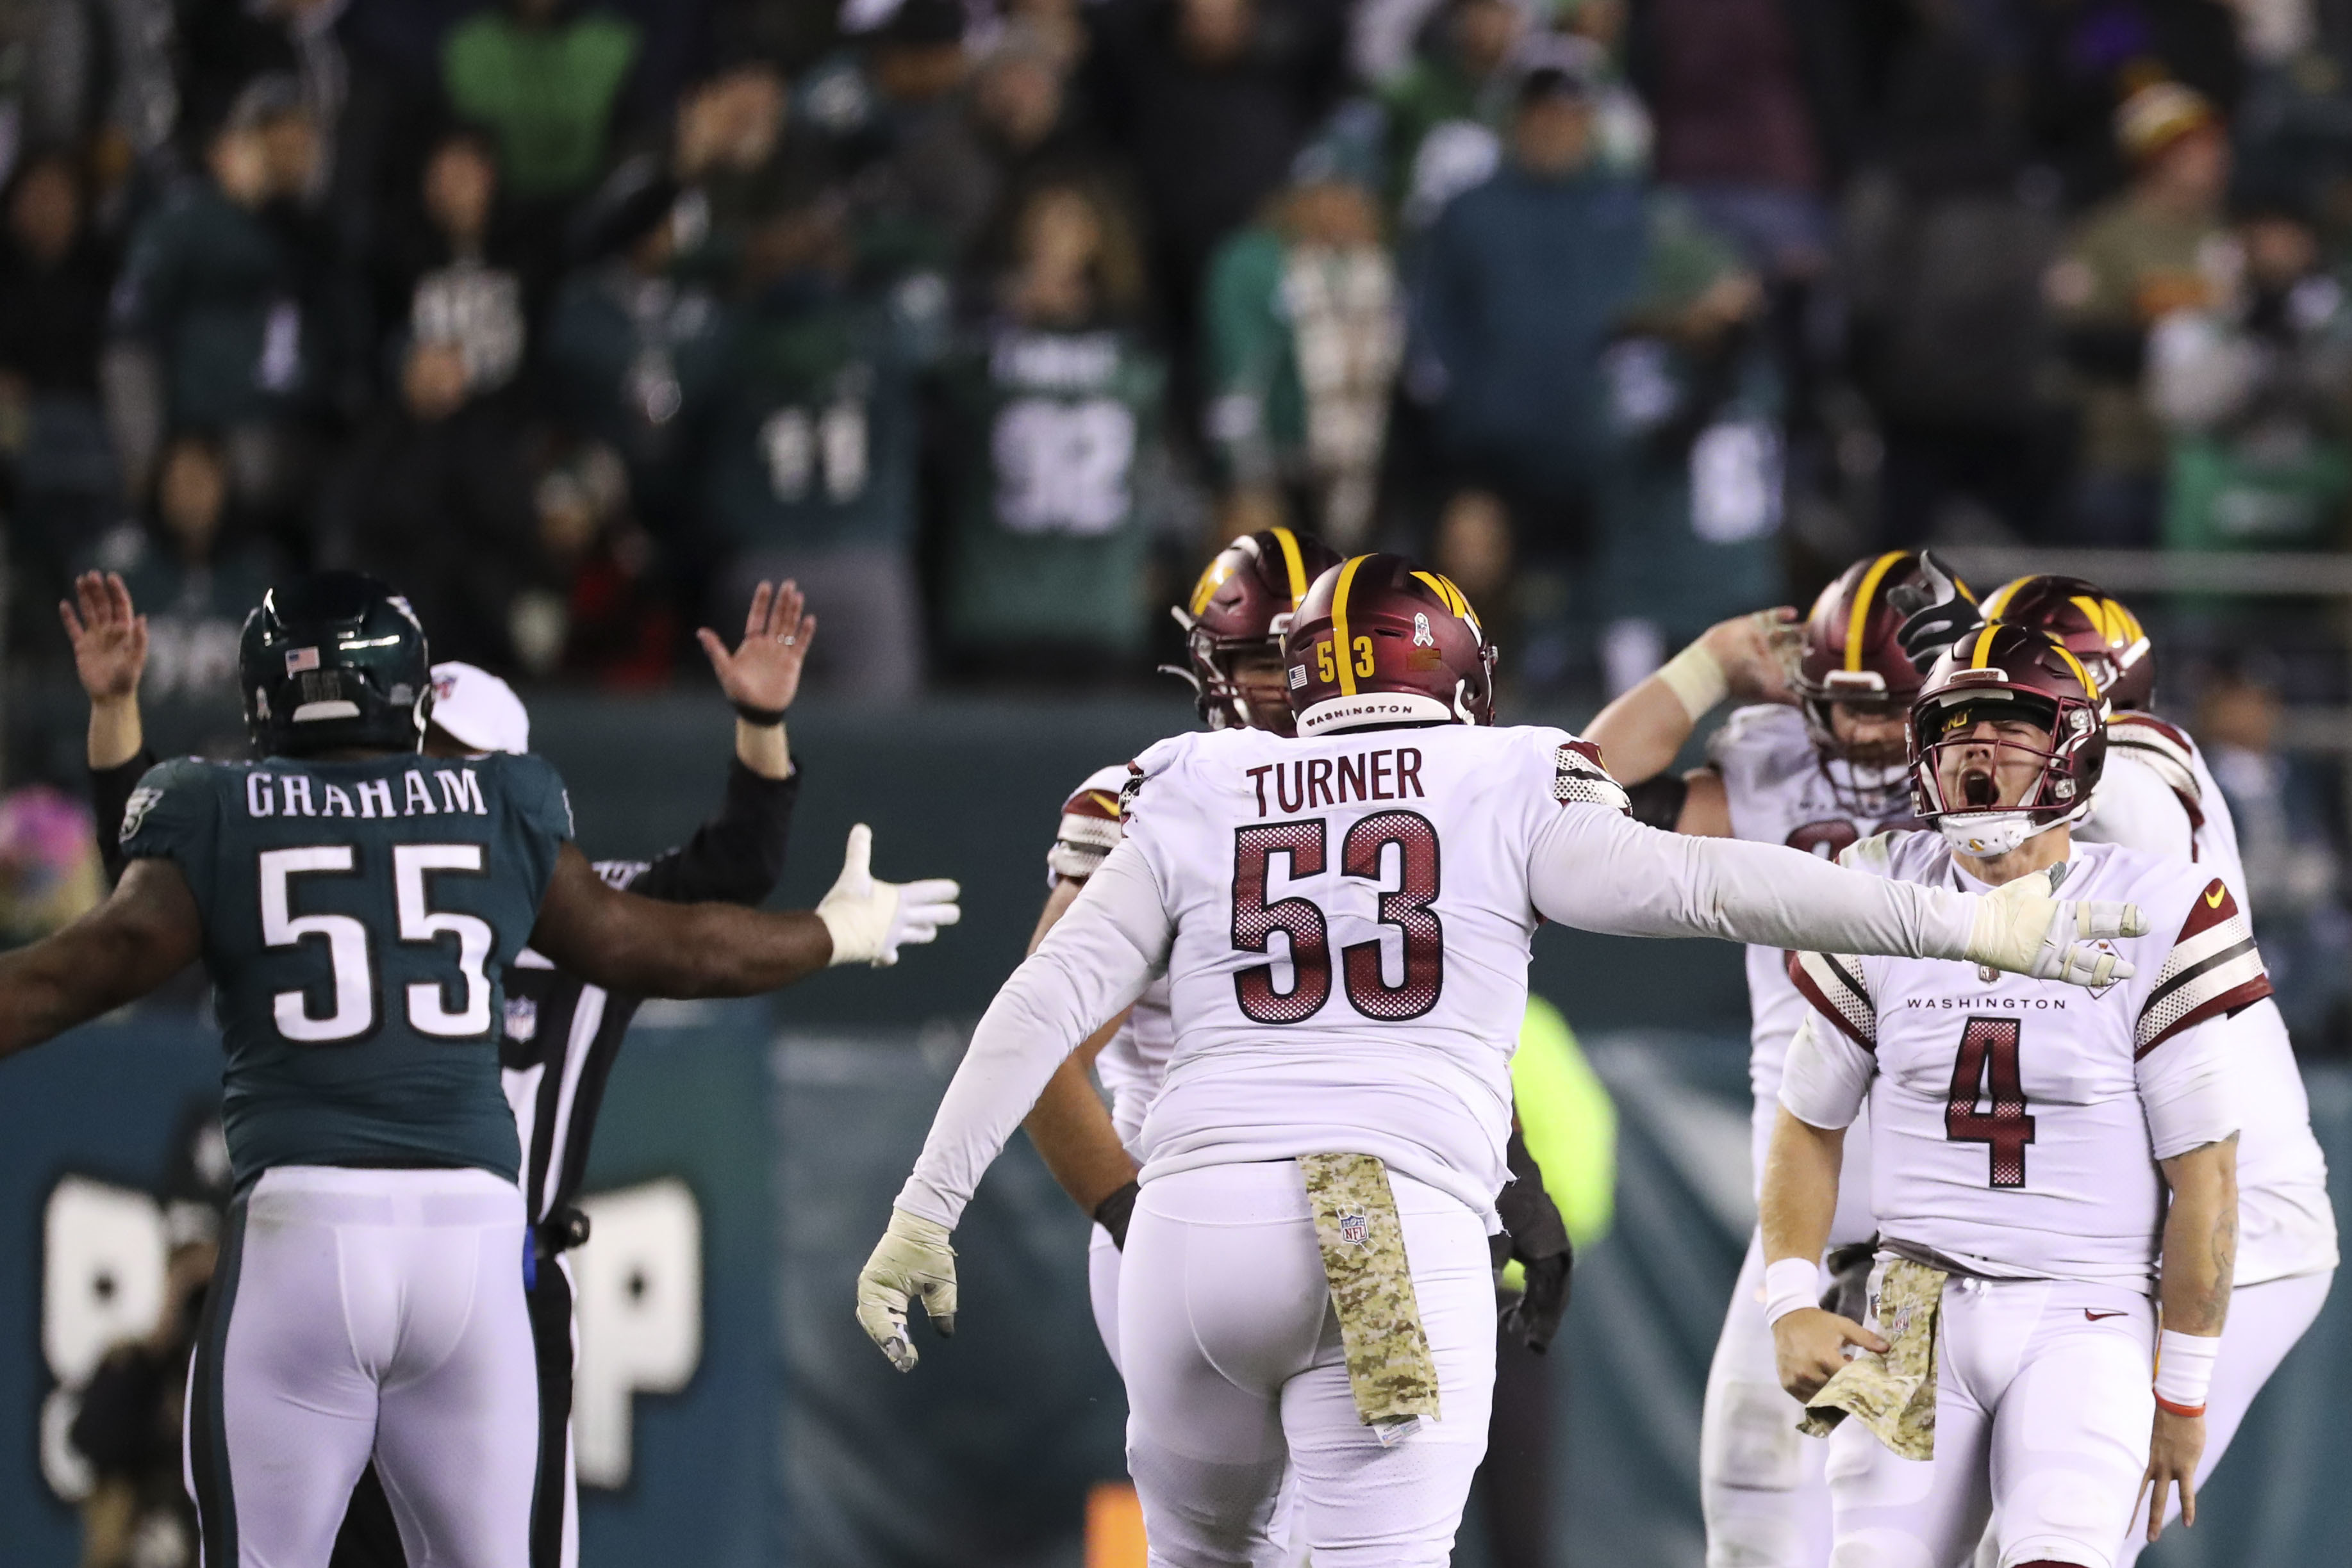 Commanders hand Eagles first loss of season in 'MNF' stunner